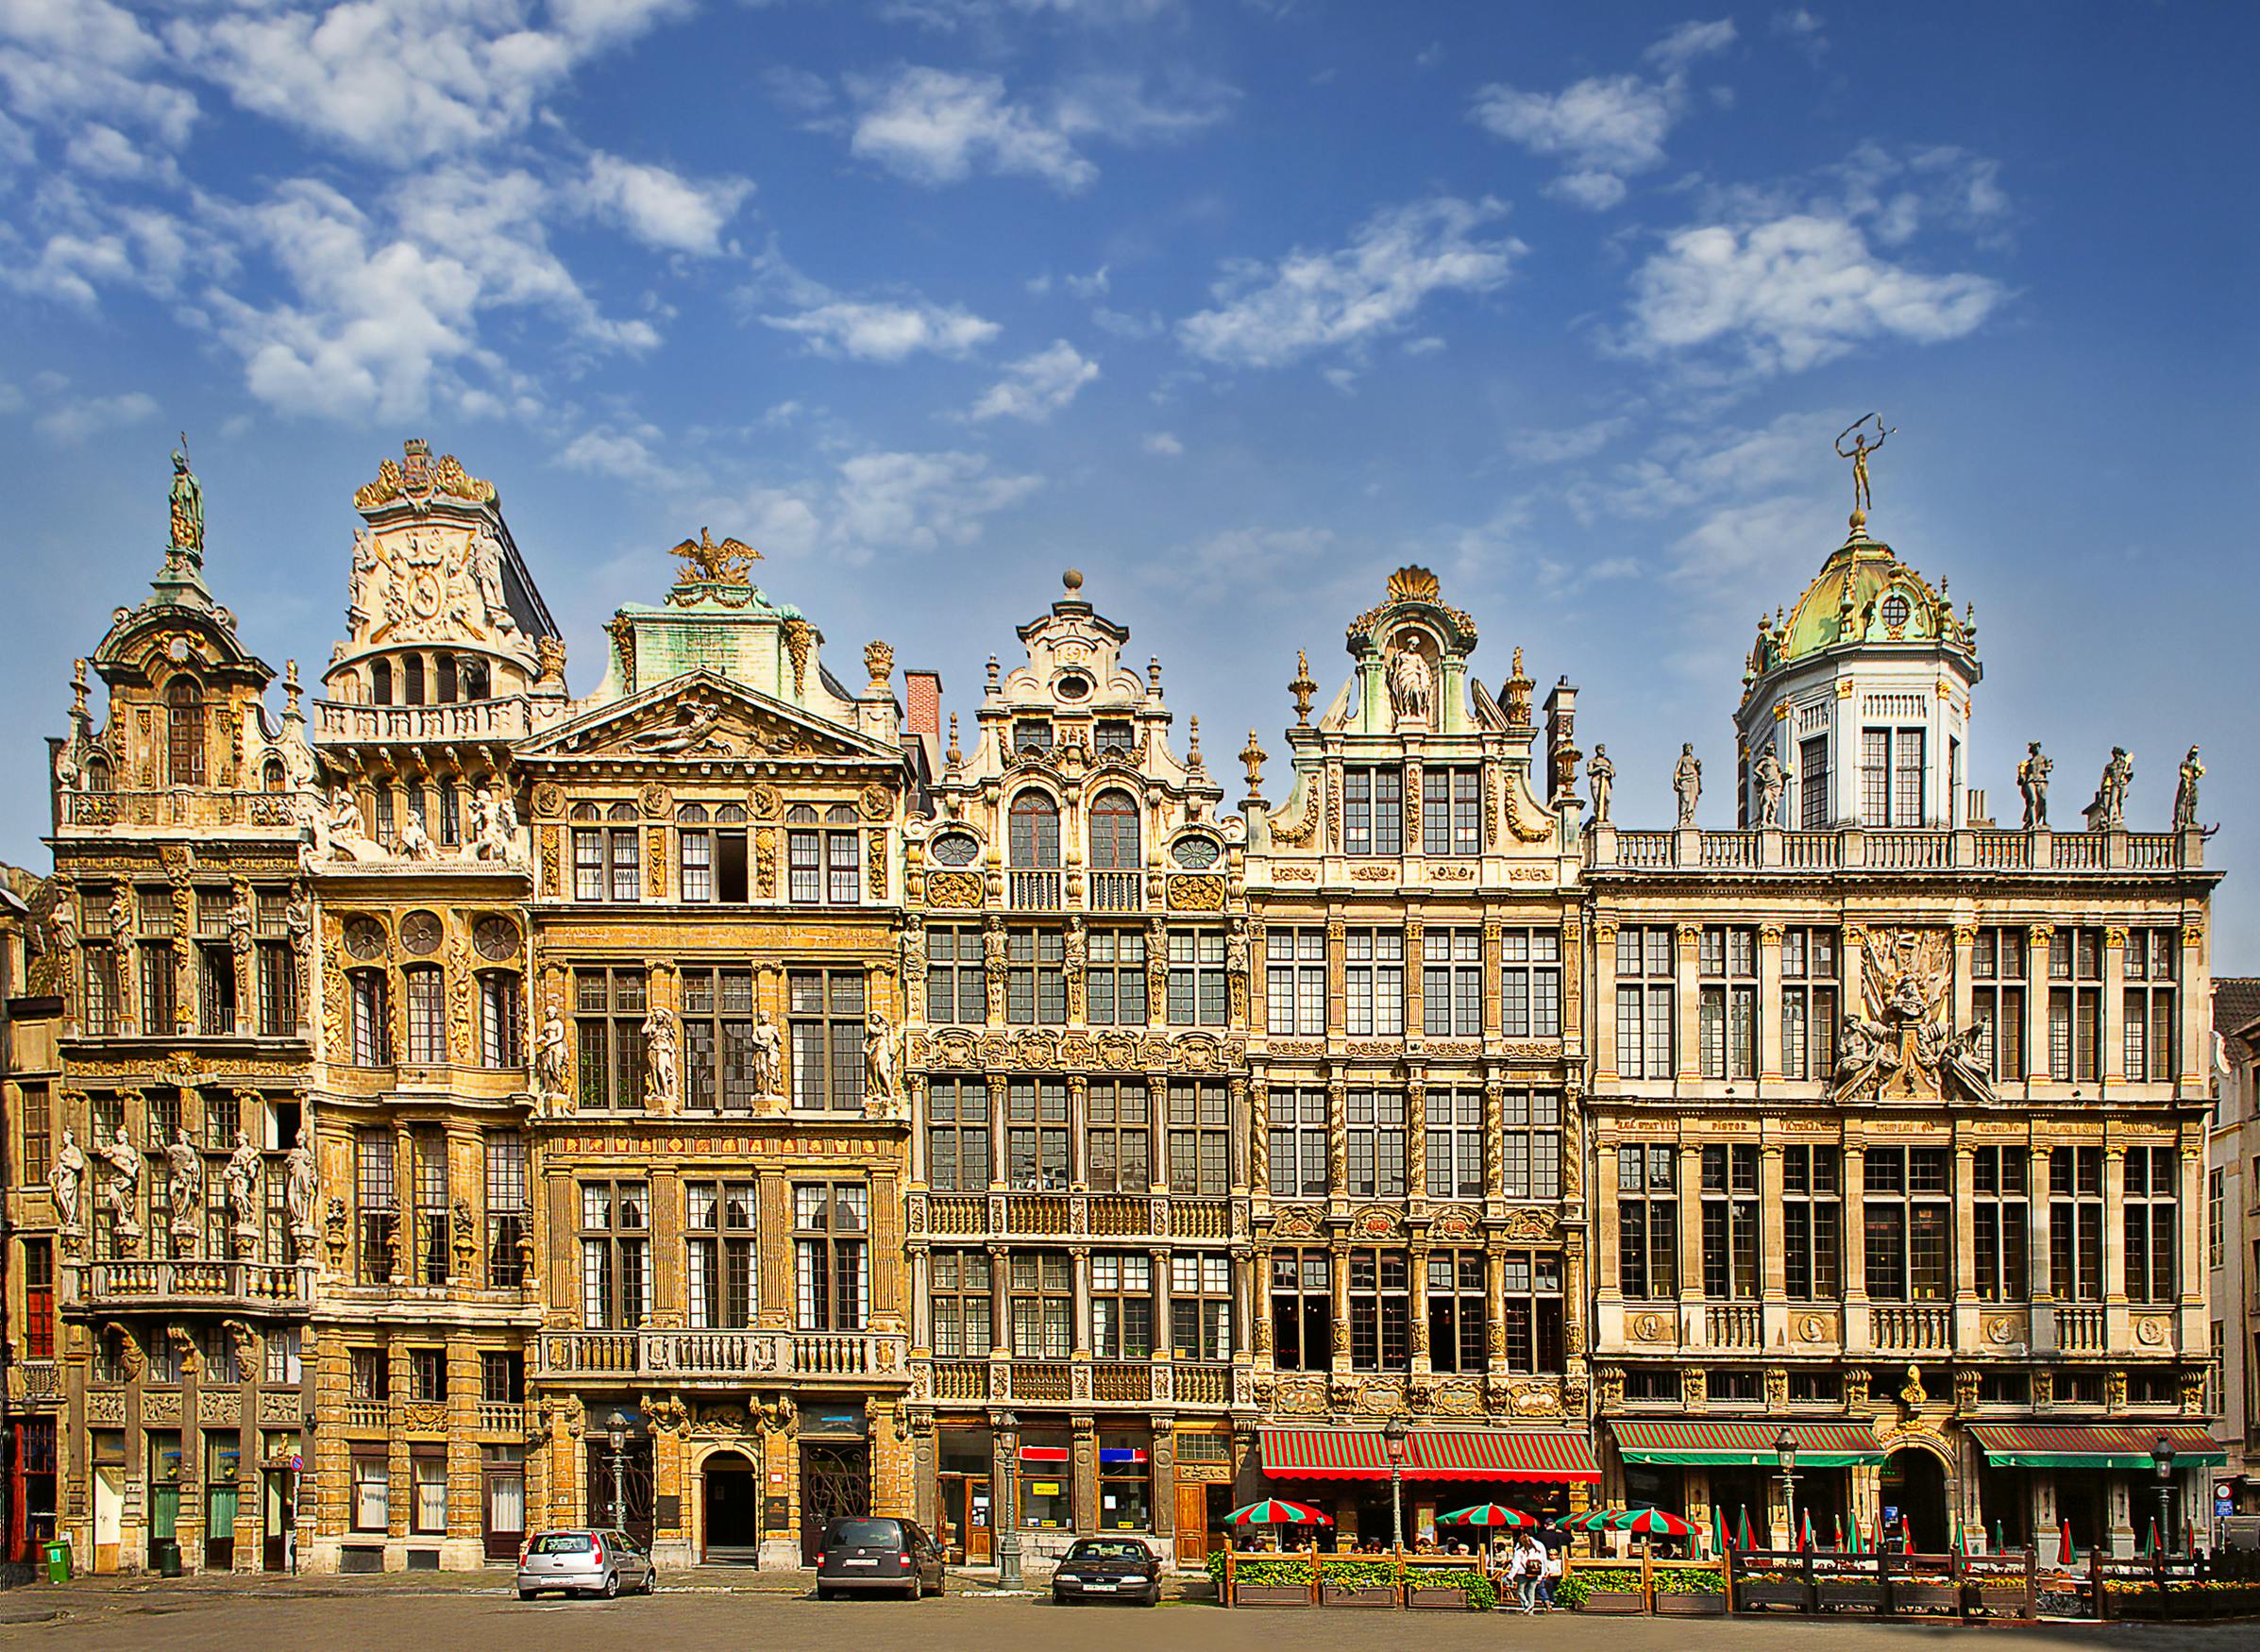 Brussels day tour from Amsterdam